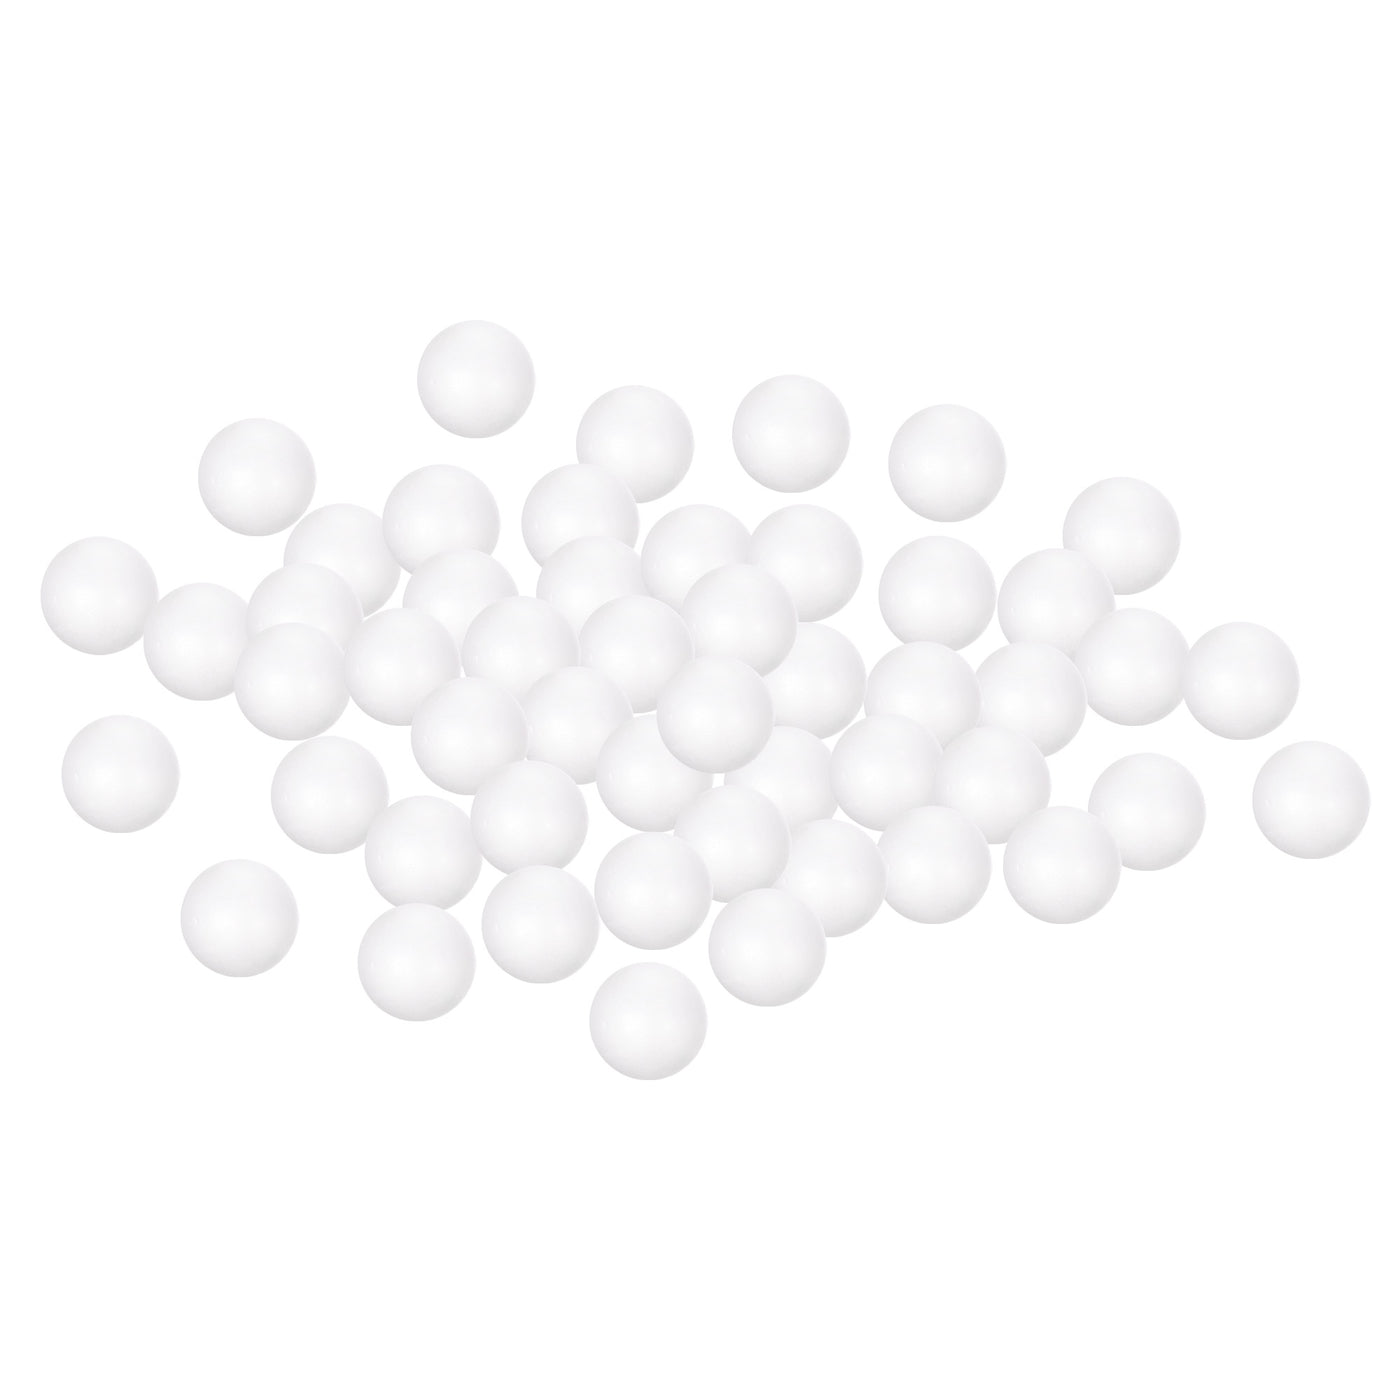 Uxcell Uxcell 50Pcs 1.5" White Polystyrene Foam Solid Balls for Crafts and Party Decorations